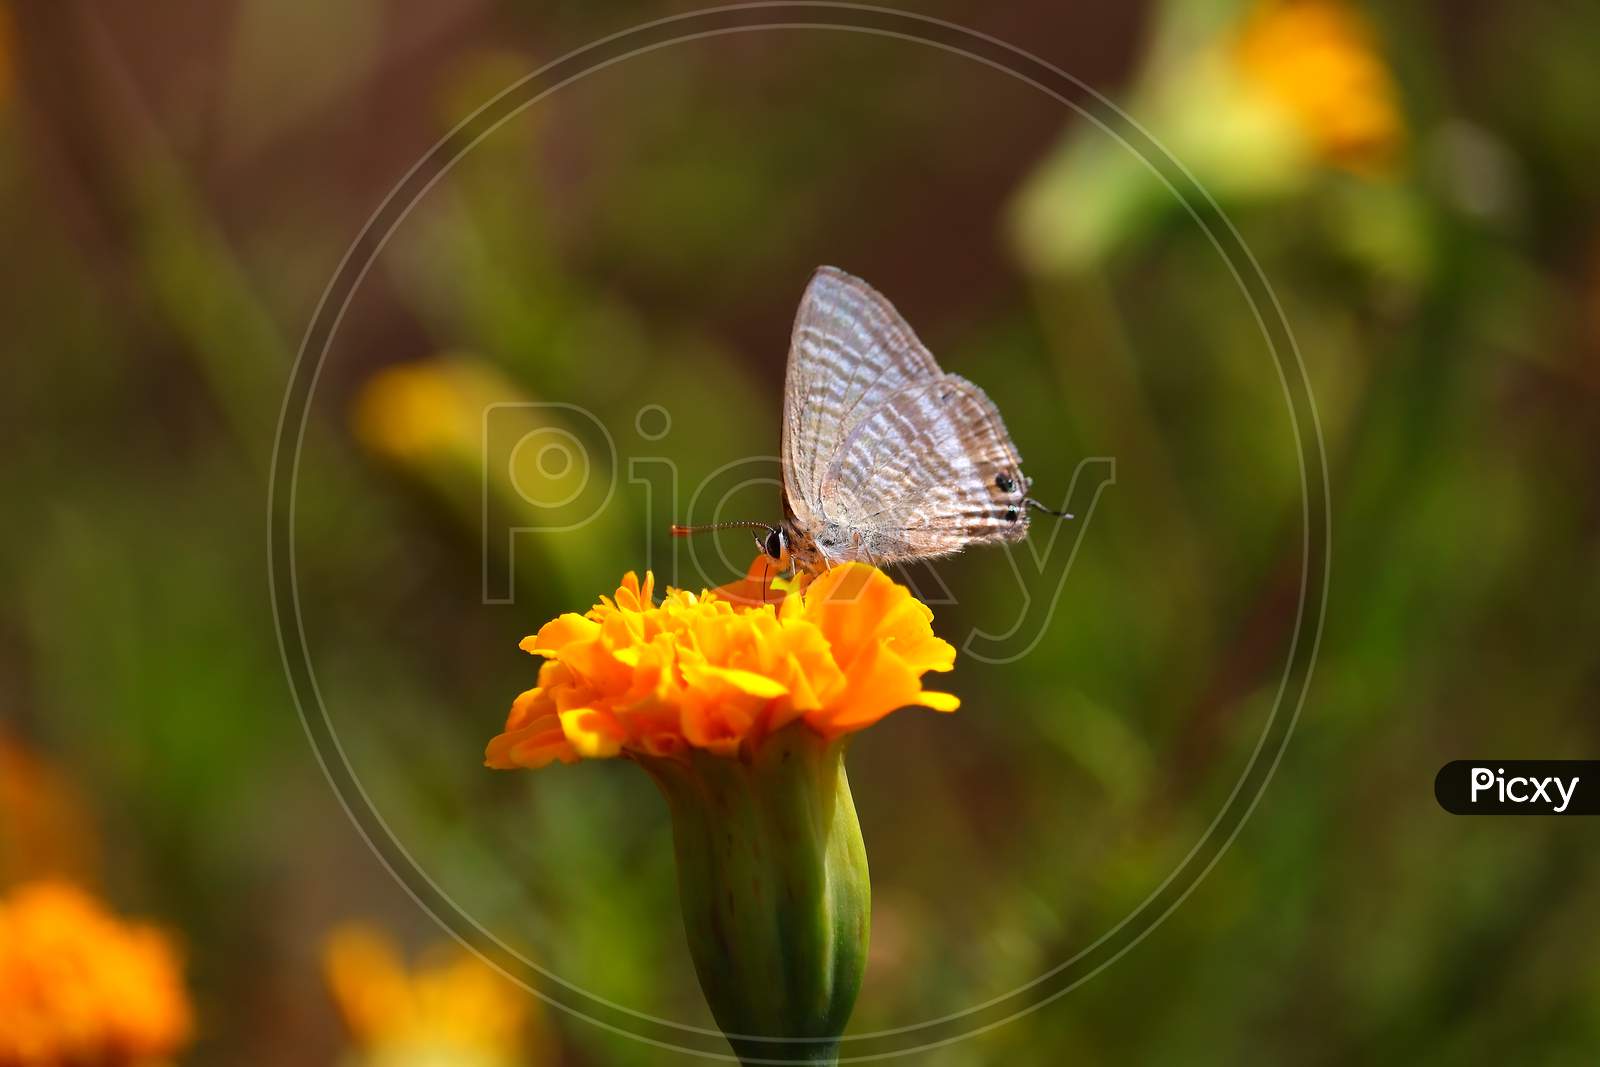 white butterfly on marigold flower